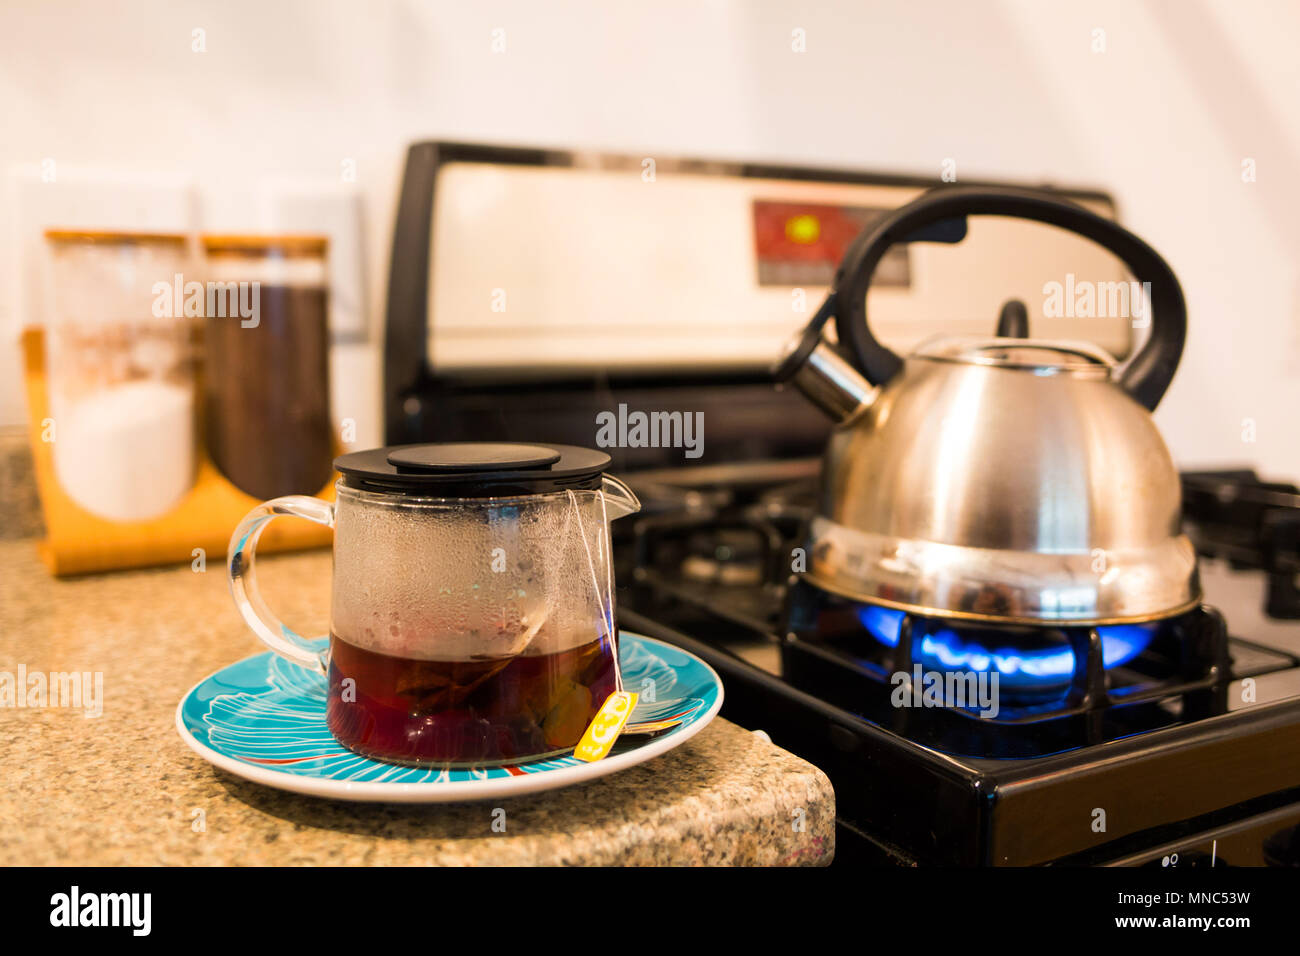 Realistic Electric Kettles Set Modern Teapots For Boiling Water For Tea Or  Coffee Stock Illustration - Download Image Now - iStock